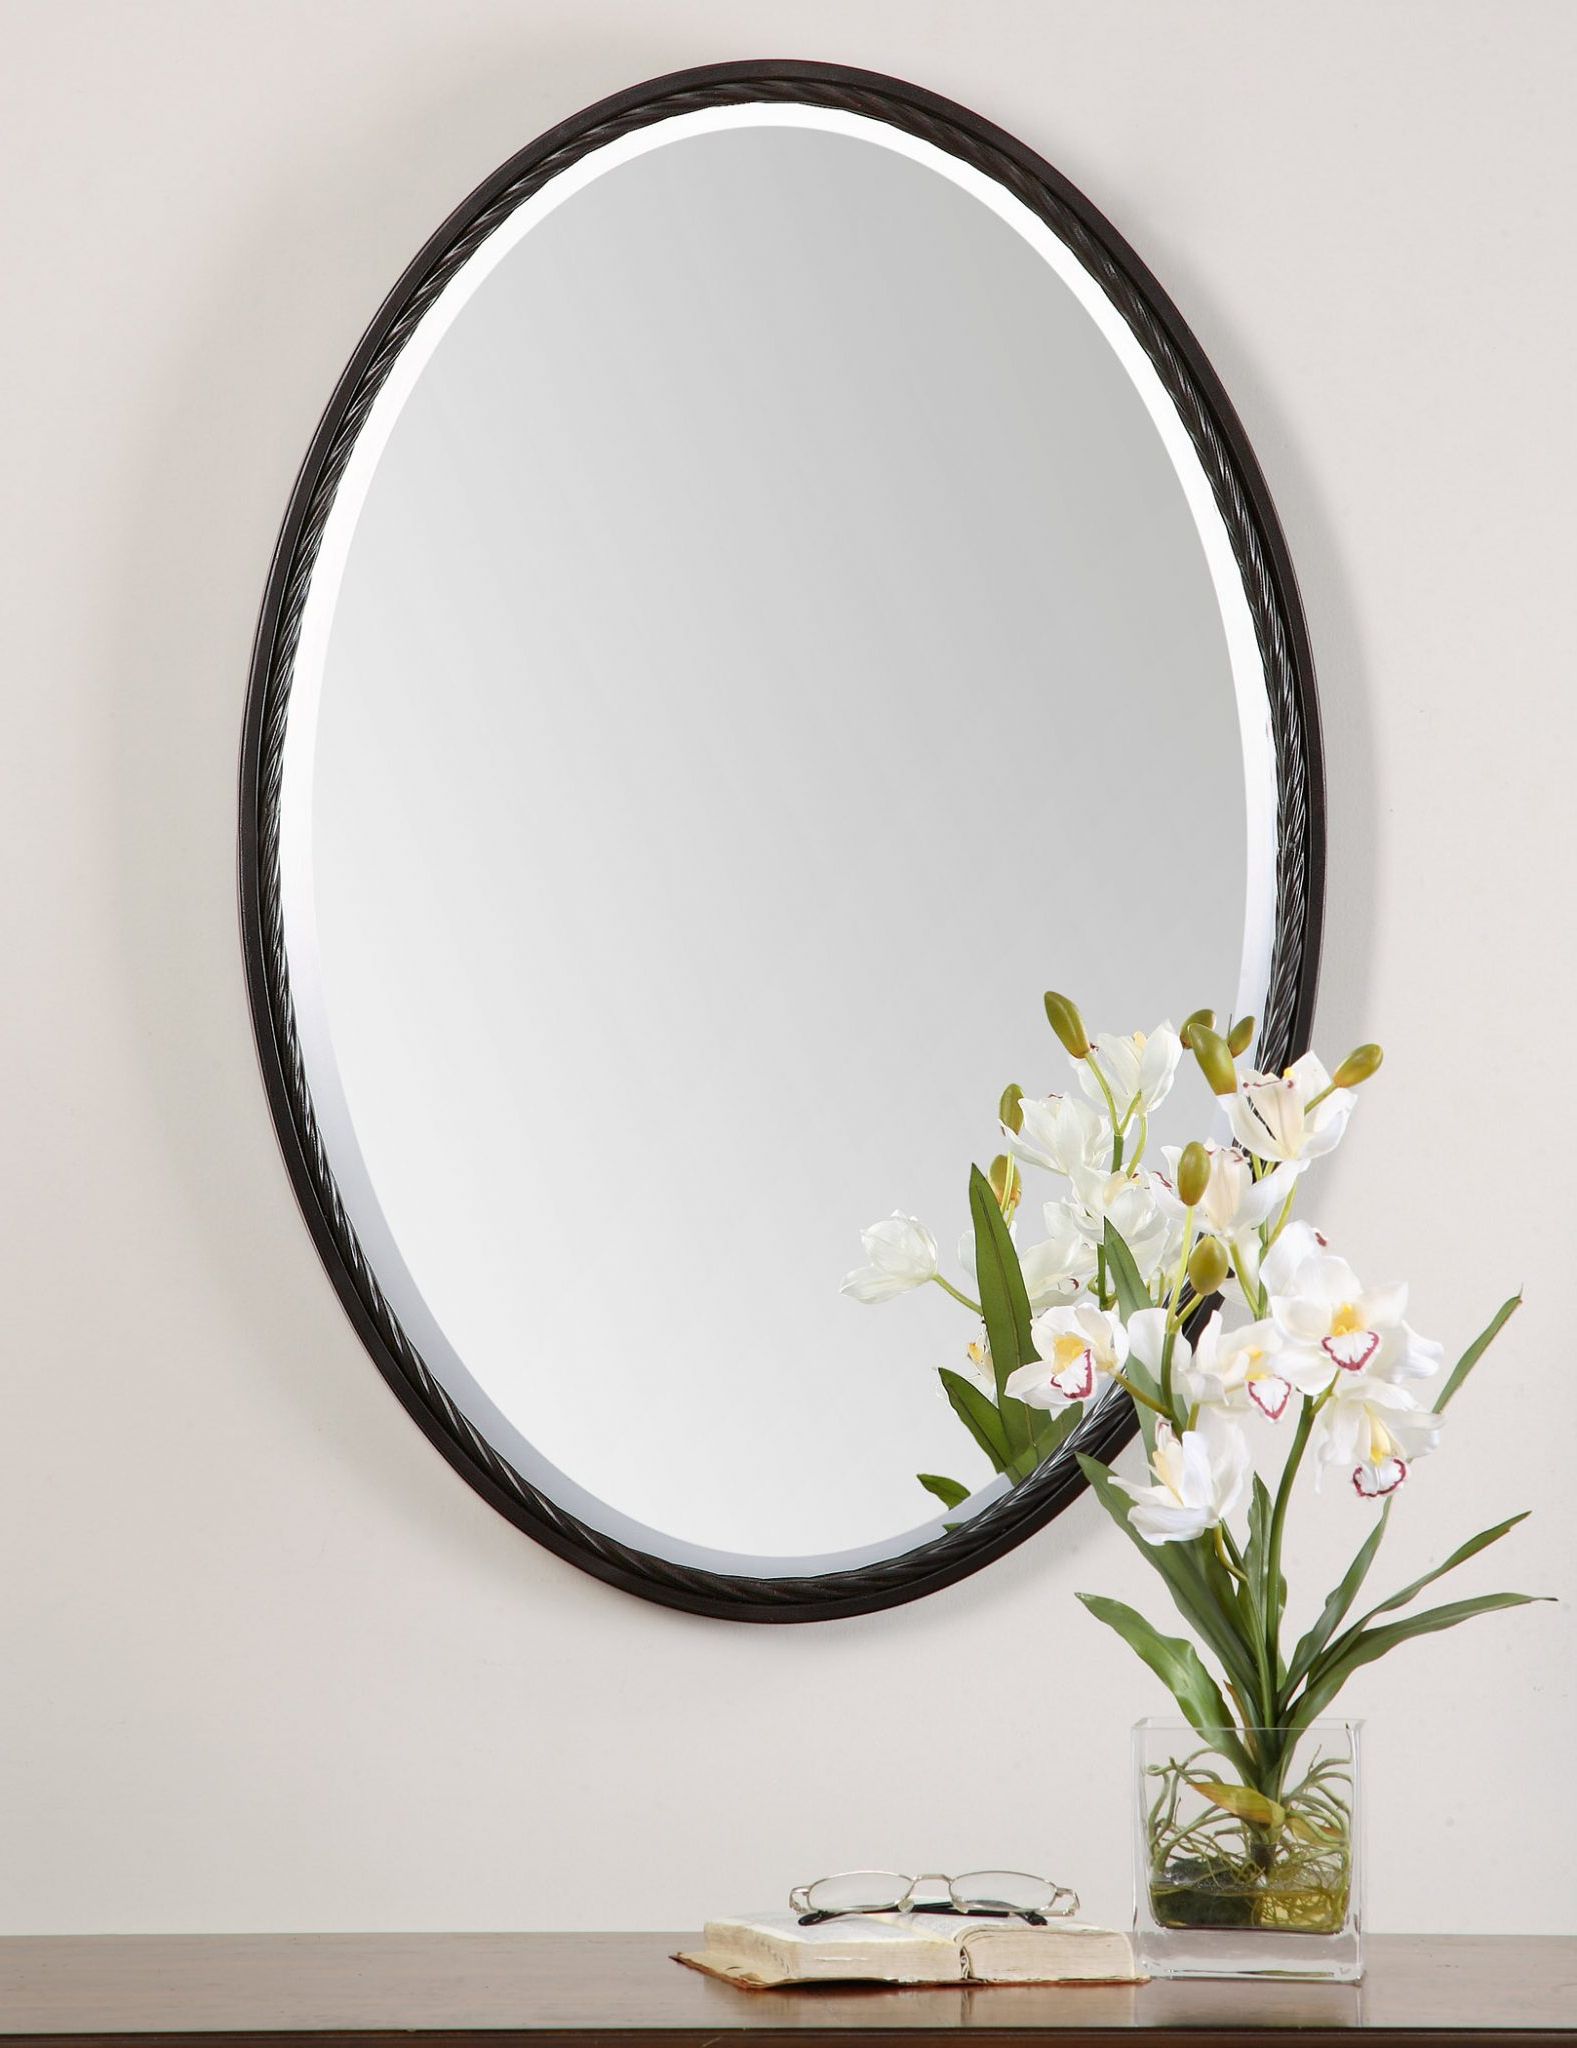 Oil Rubbed Bronze Finish Oval Wall Mirrors For Most Up To Date Uttermost Casalina Oil Rubbed Bronze Oval Mirror – Sacksteder's (View 14 of 15)